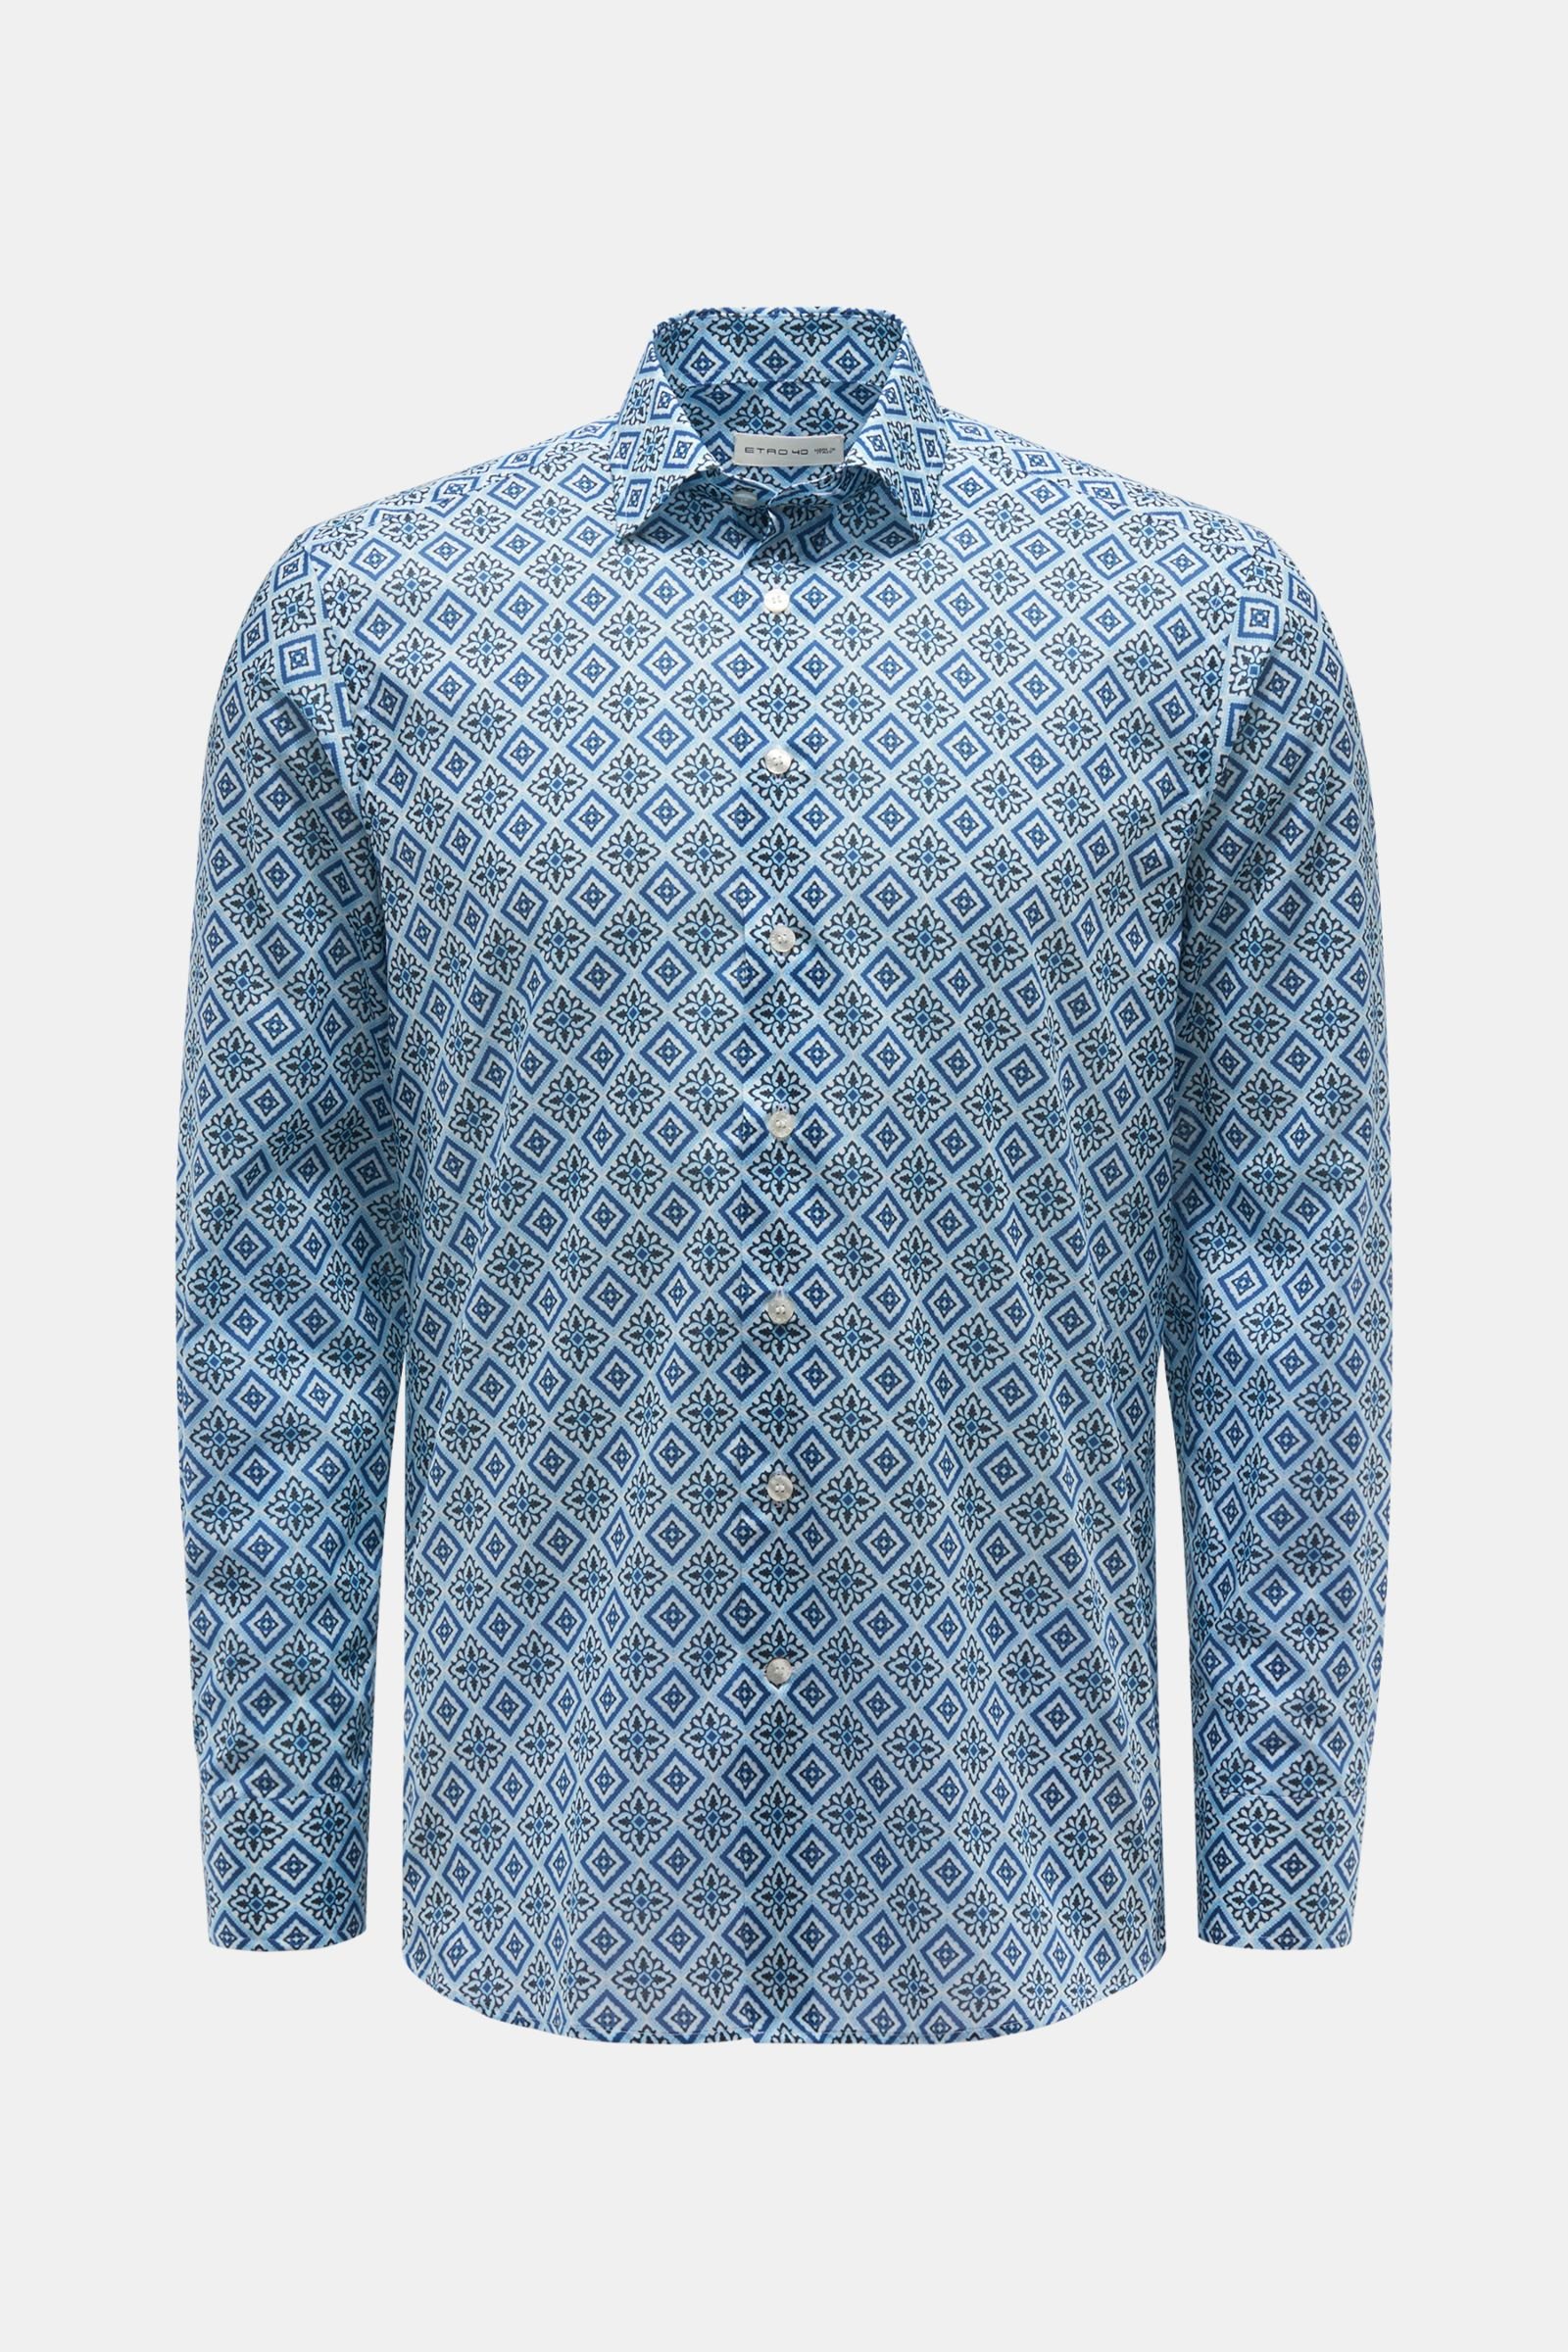 Casual shirt narrow collar blue/white patterned